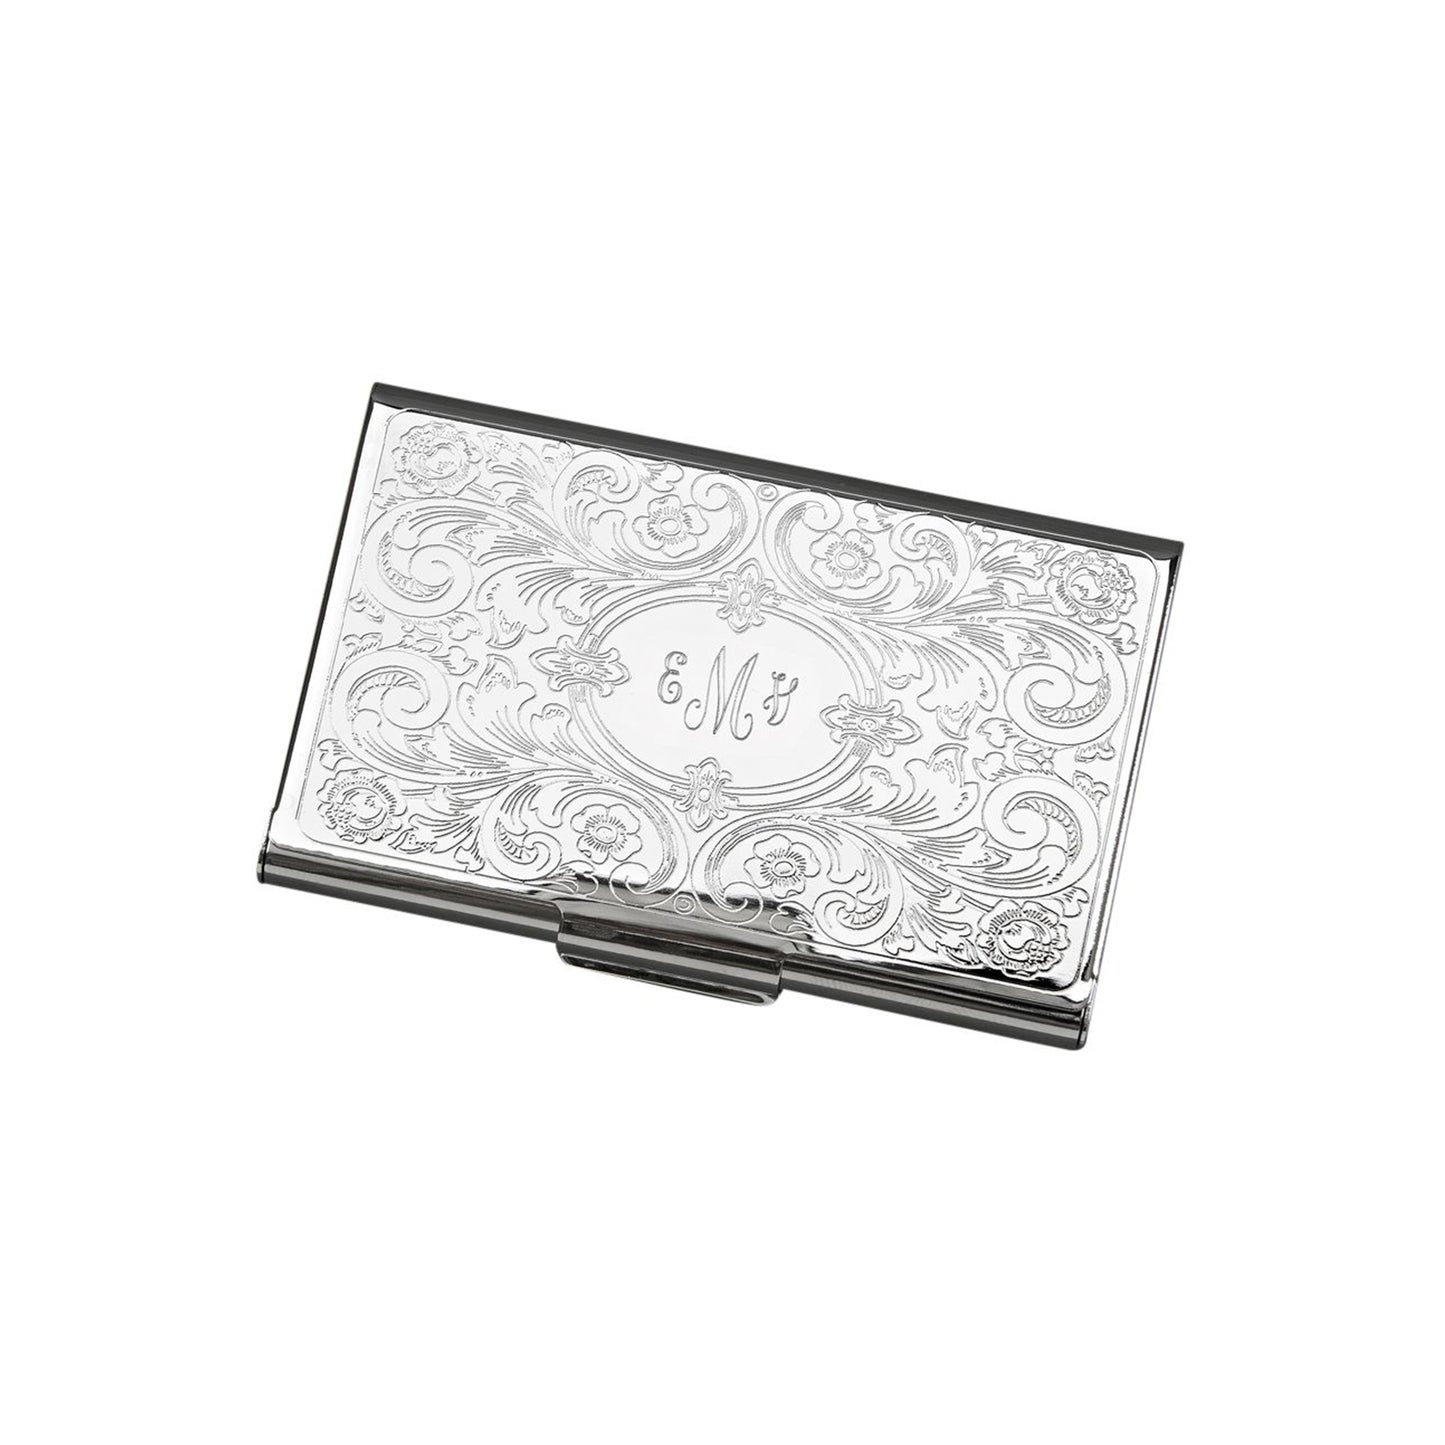 Card Case With Embossed Scroll Cover